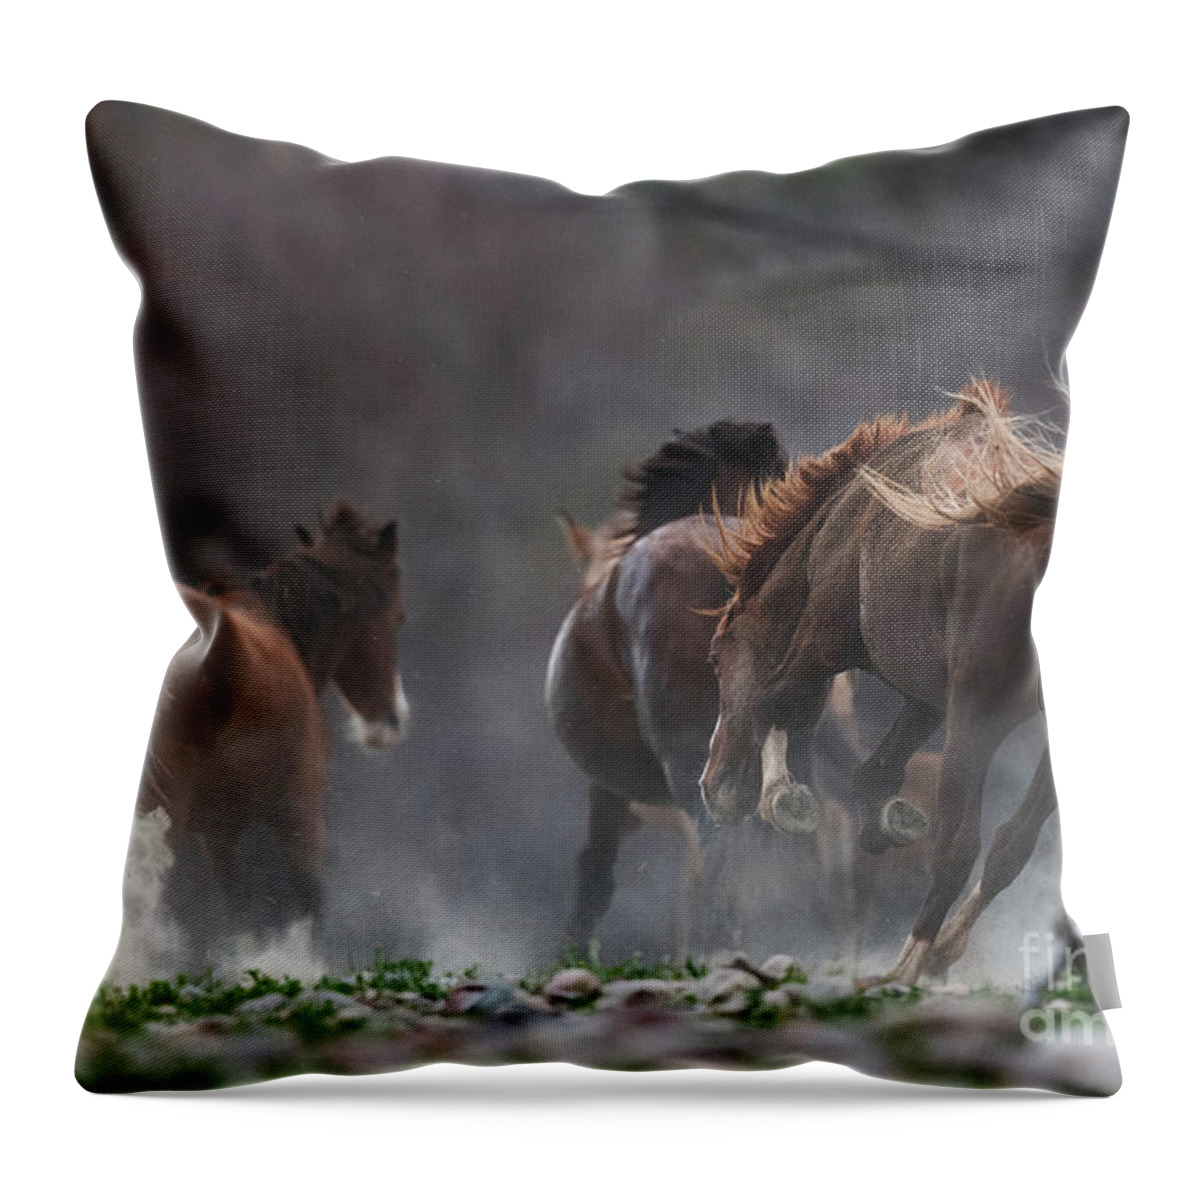 Stallion Throw Pillow featuring the photograph The Chase by Shannon Hastings